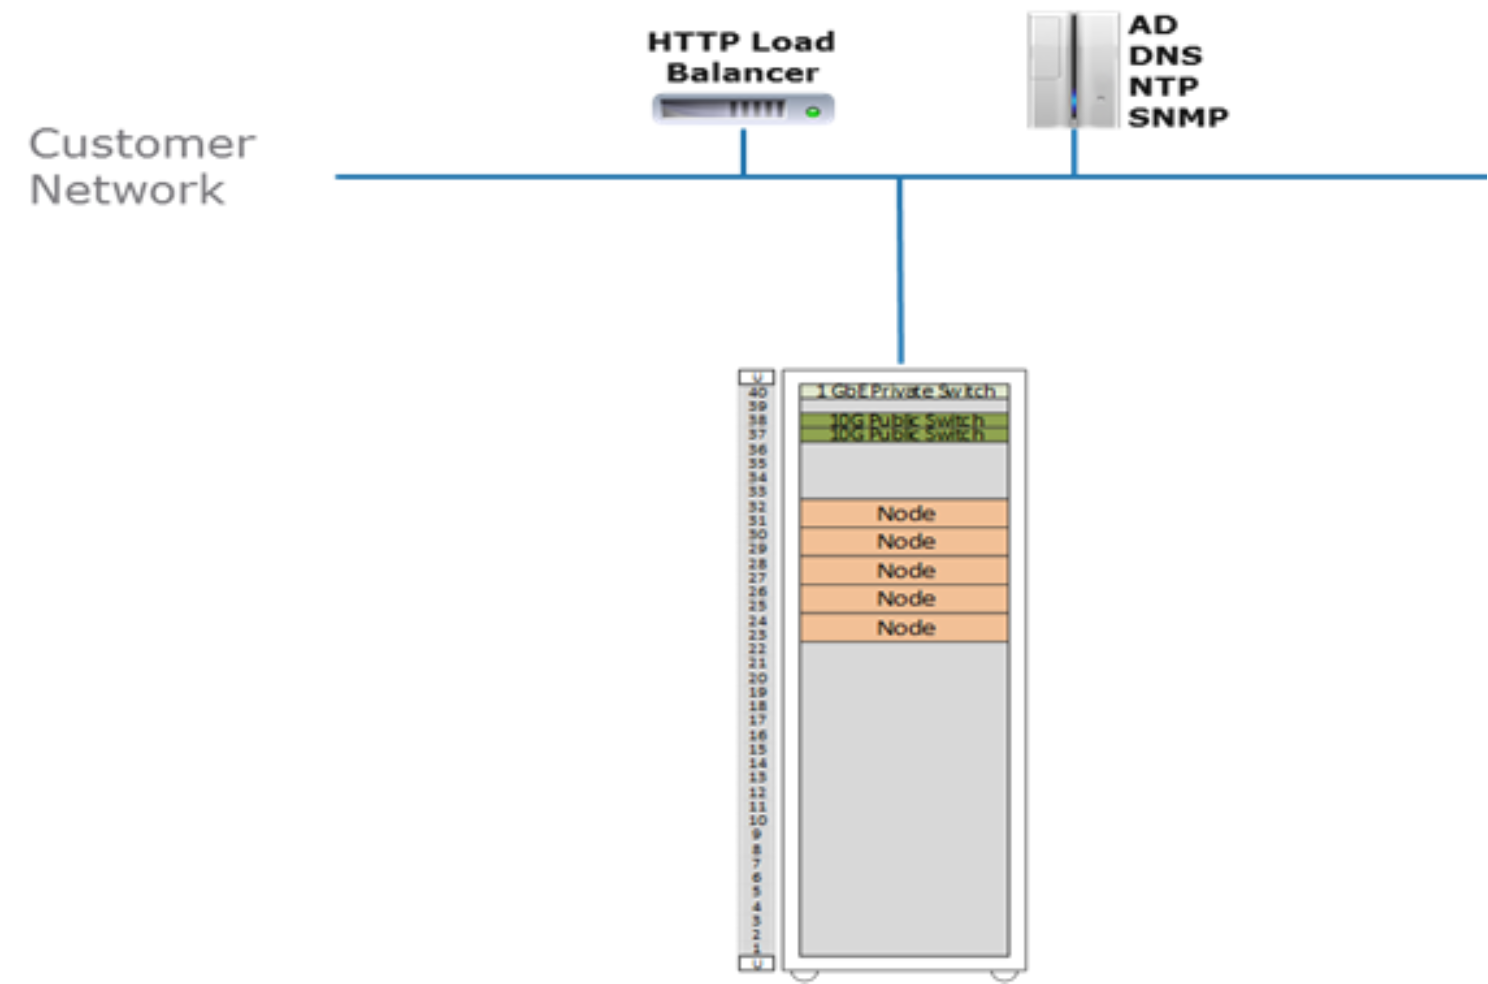 This is an example of customer-provided infrastructure, which includes the ECS, load balancer, AD, DNS, NTP, and SNMP.